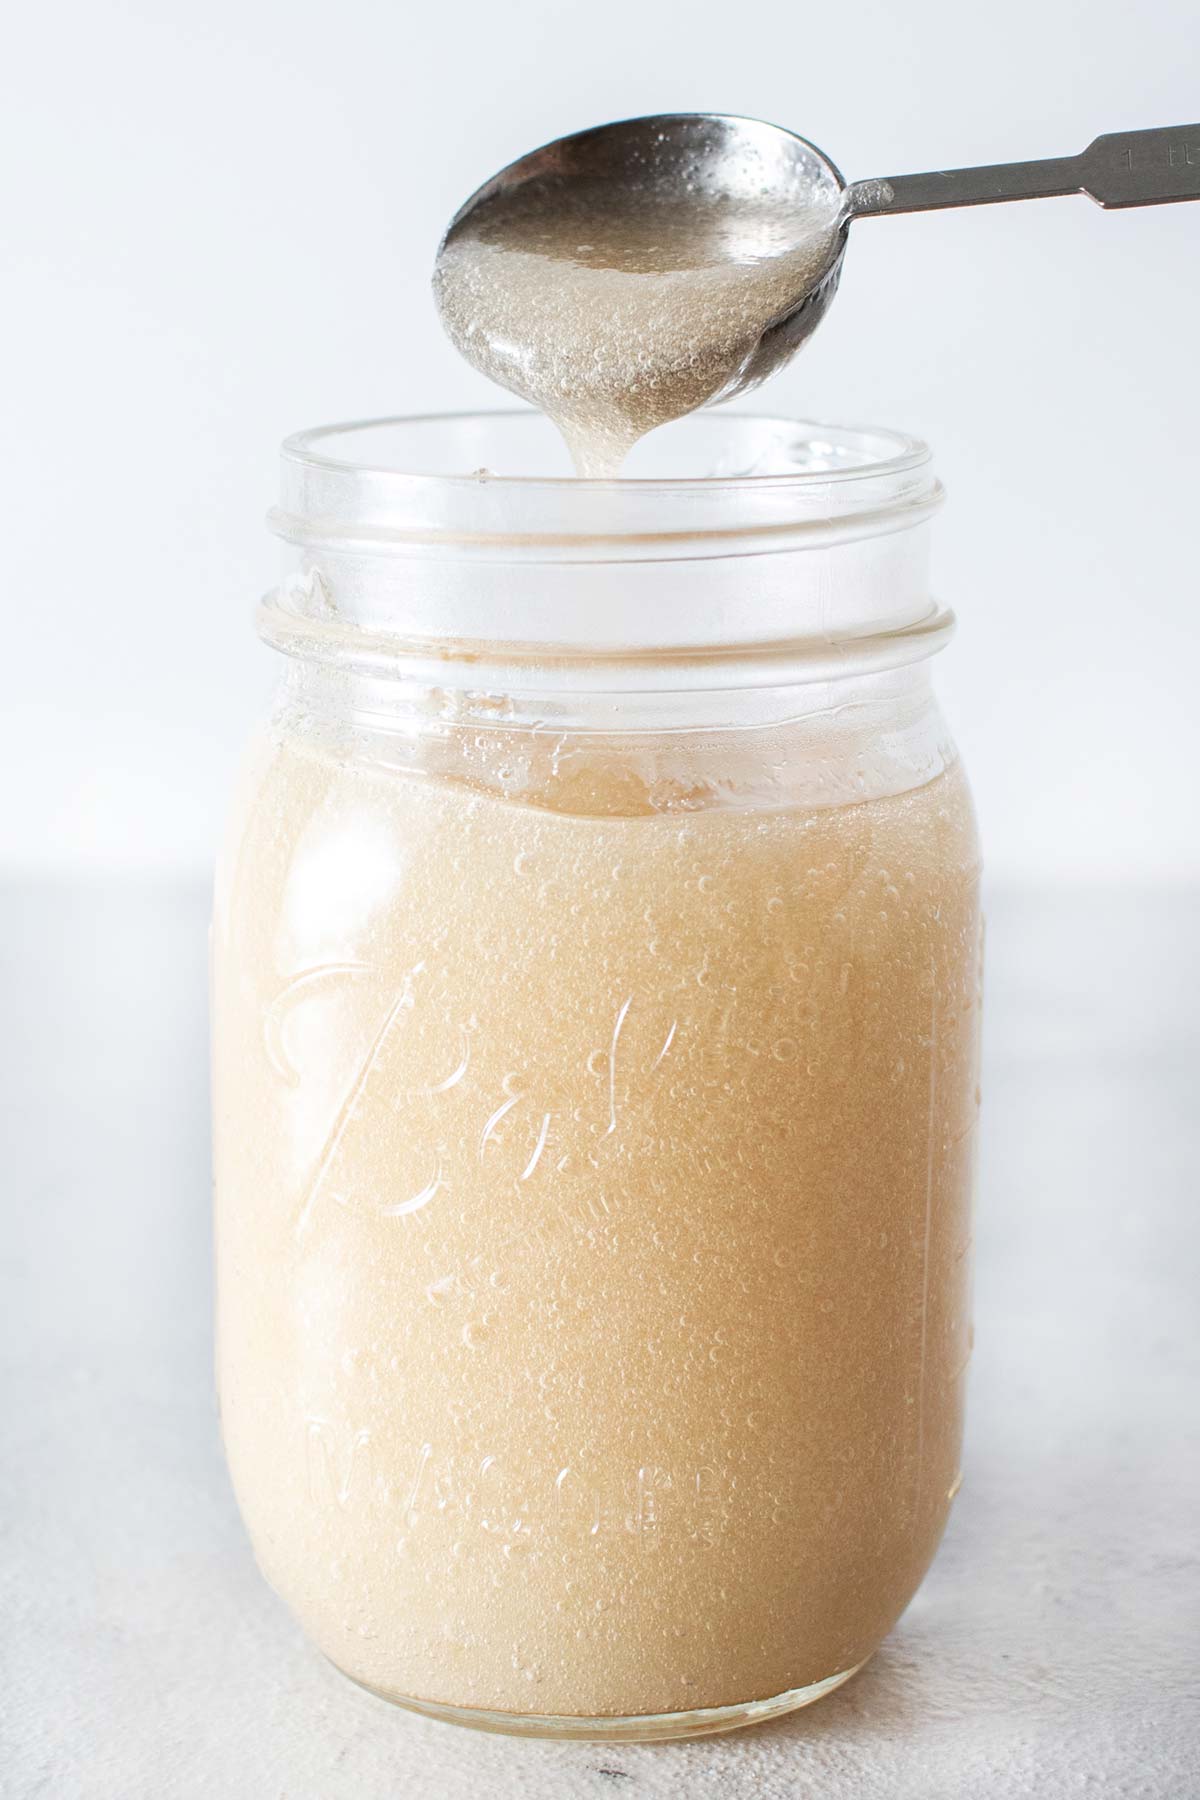 Starbucks Frappuccino base syrup in a jar.